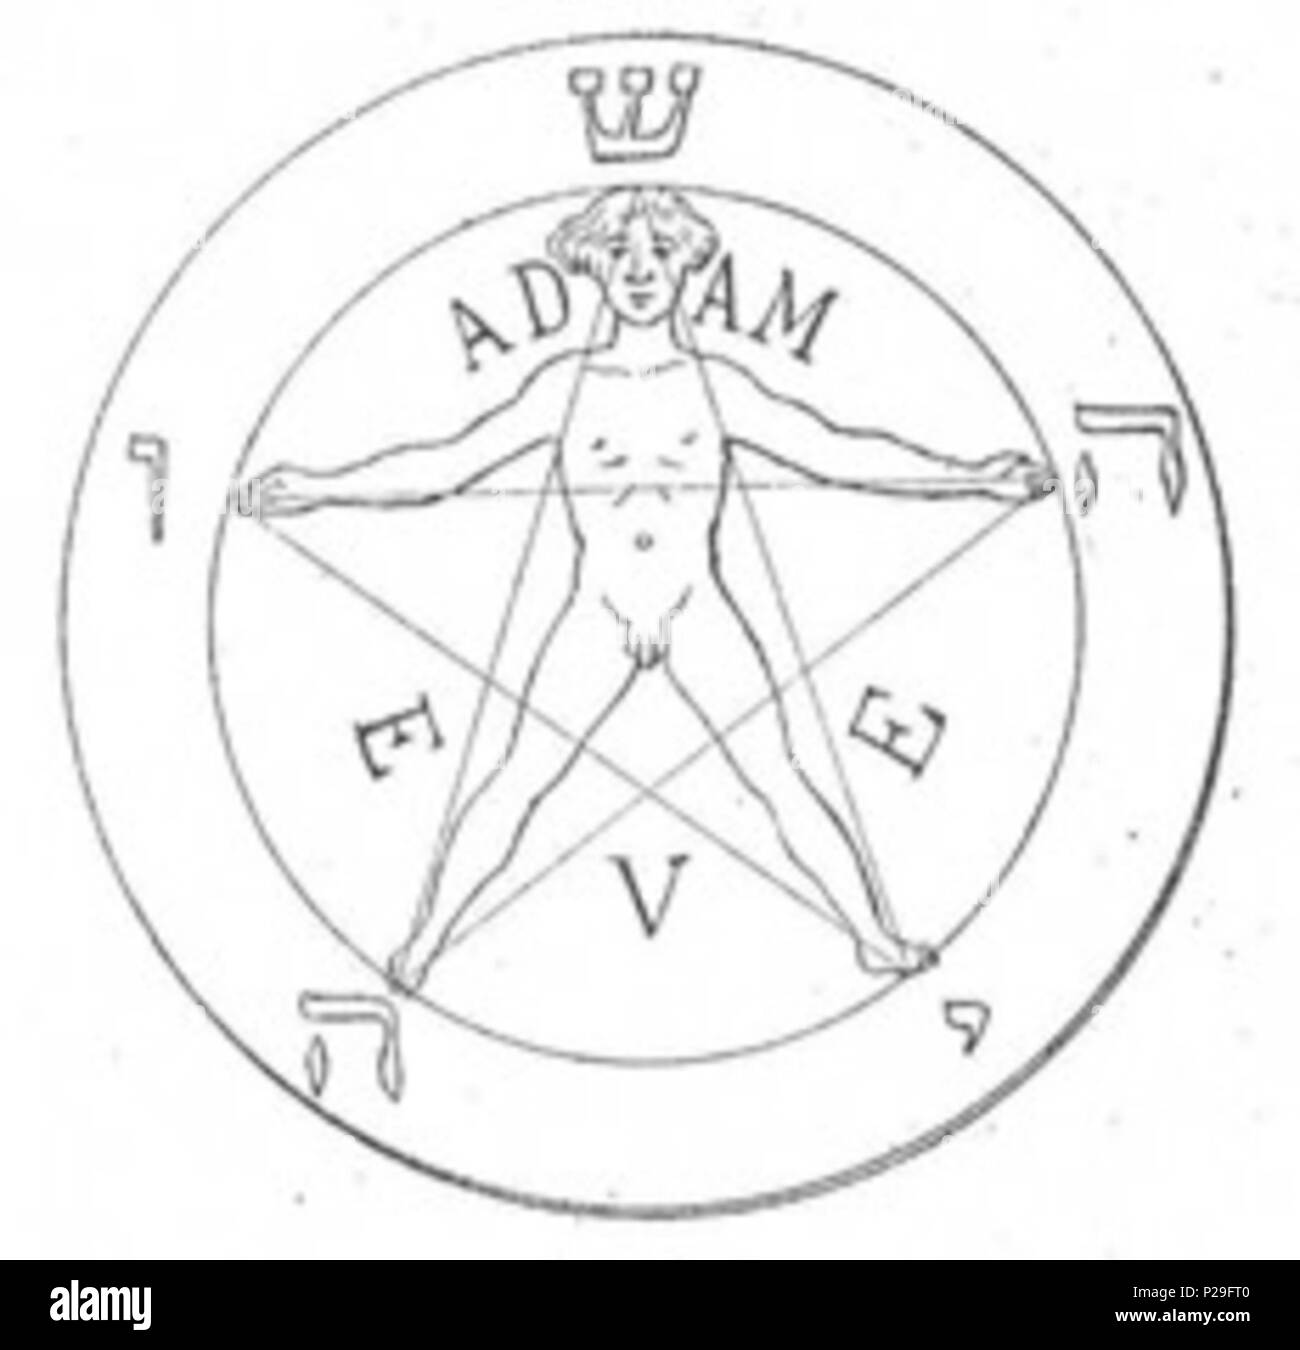 . English: Pentagram with one point up (de Guaita) Includes form of the 'Pentagrammaton' (i.e. an incorrect attempt to derive a version of the Hebrew name of Jesus by adding the letter shin ש in the middle of the Tetragrammaton divine name yod-he-waw-he יהוה). 1897. Stanislas de Guaita 220 Pentagram with one point up (de Guaita) Stock Photo